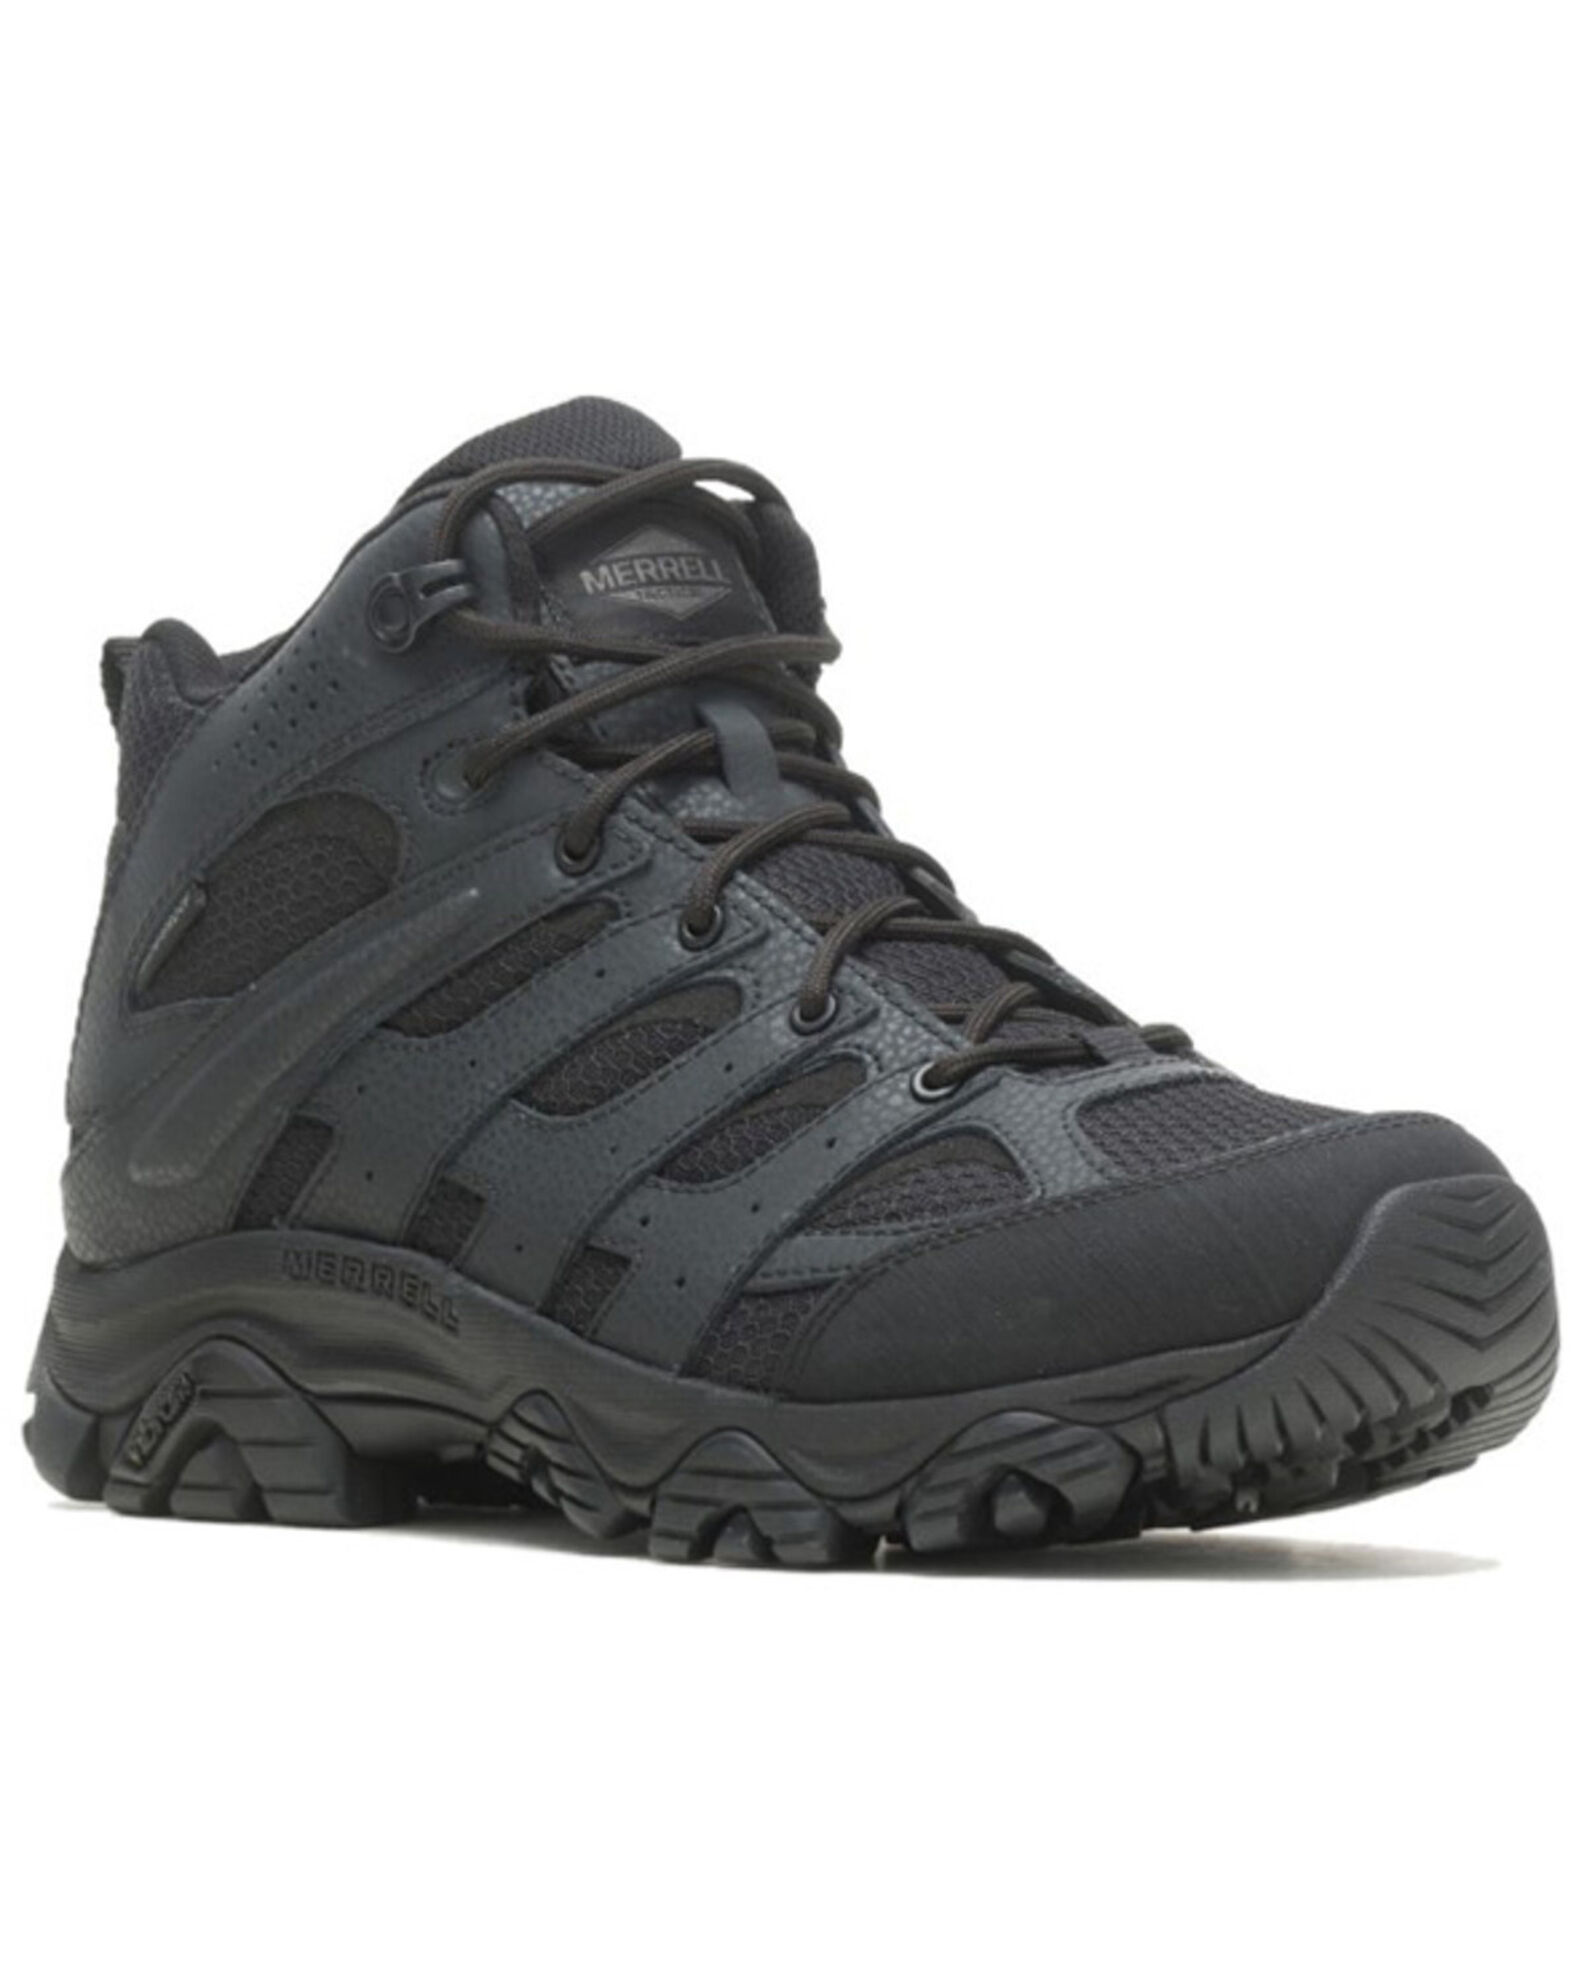 Merrell Men's Moab 3 Mid Tactical Waterproof Boots - Round Toe